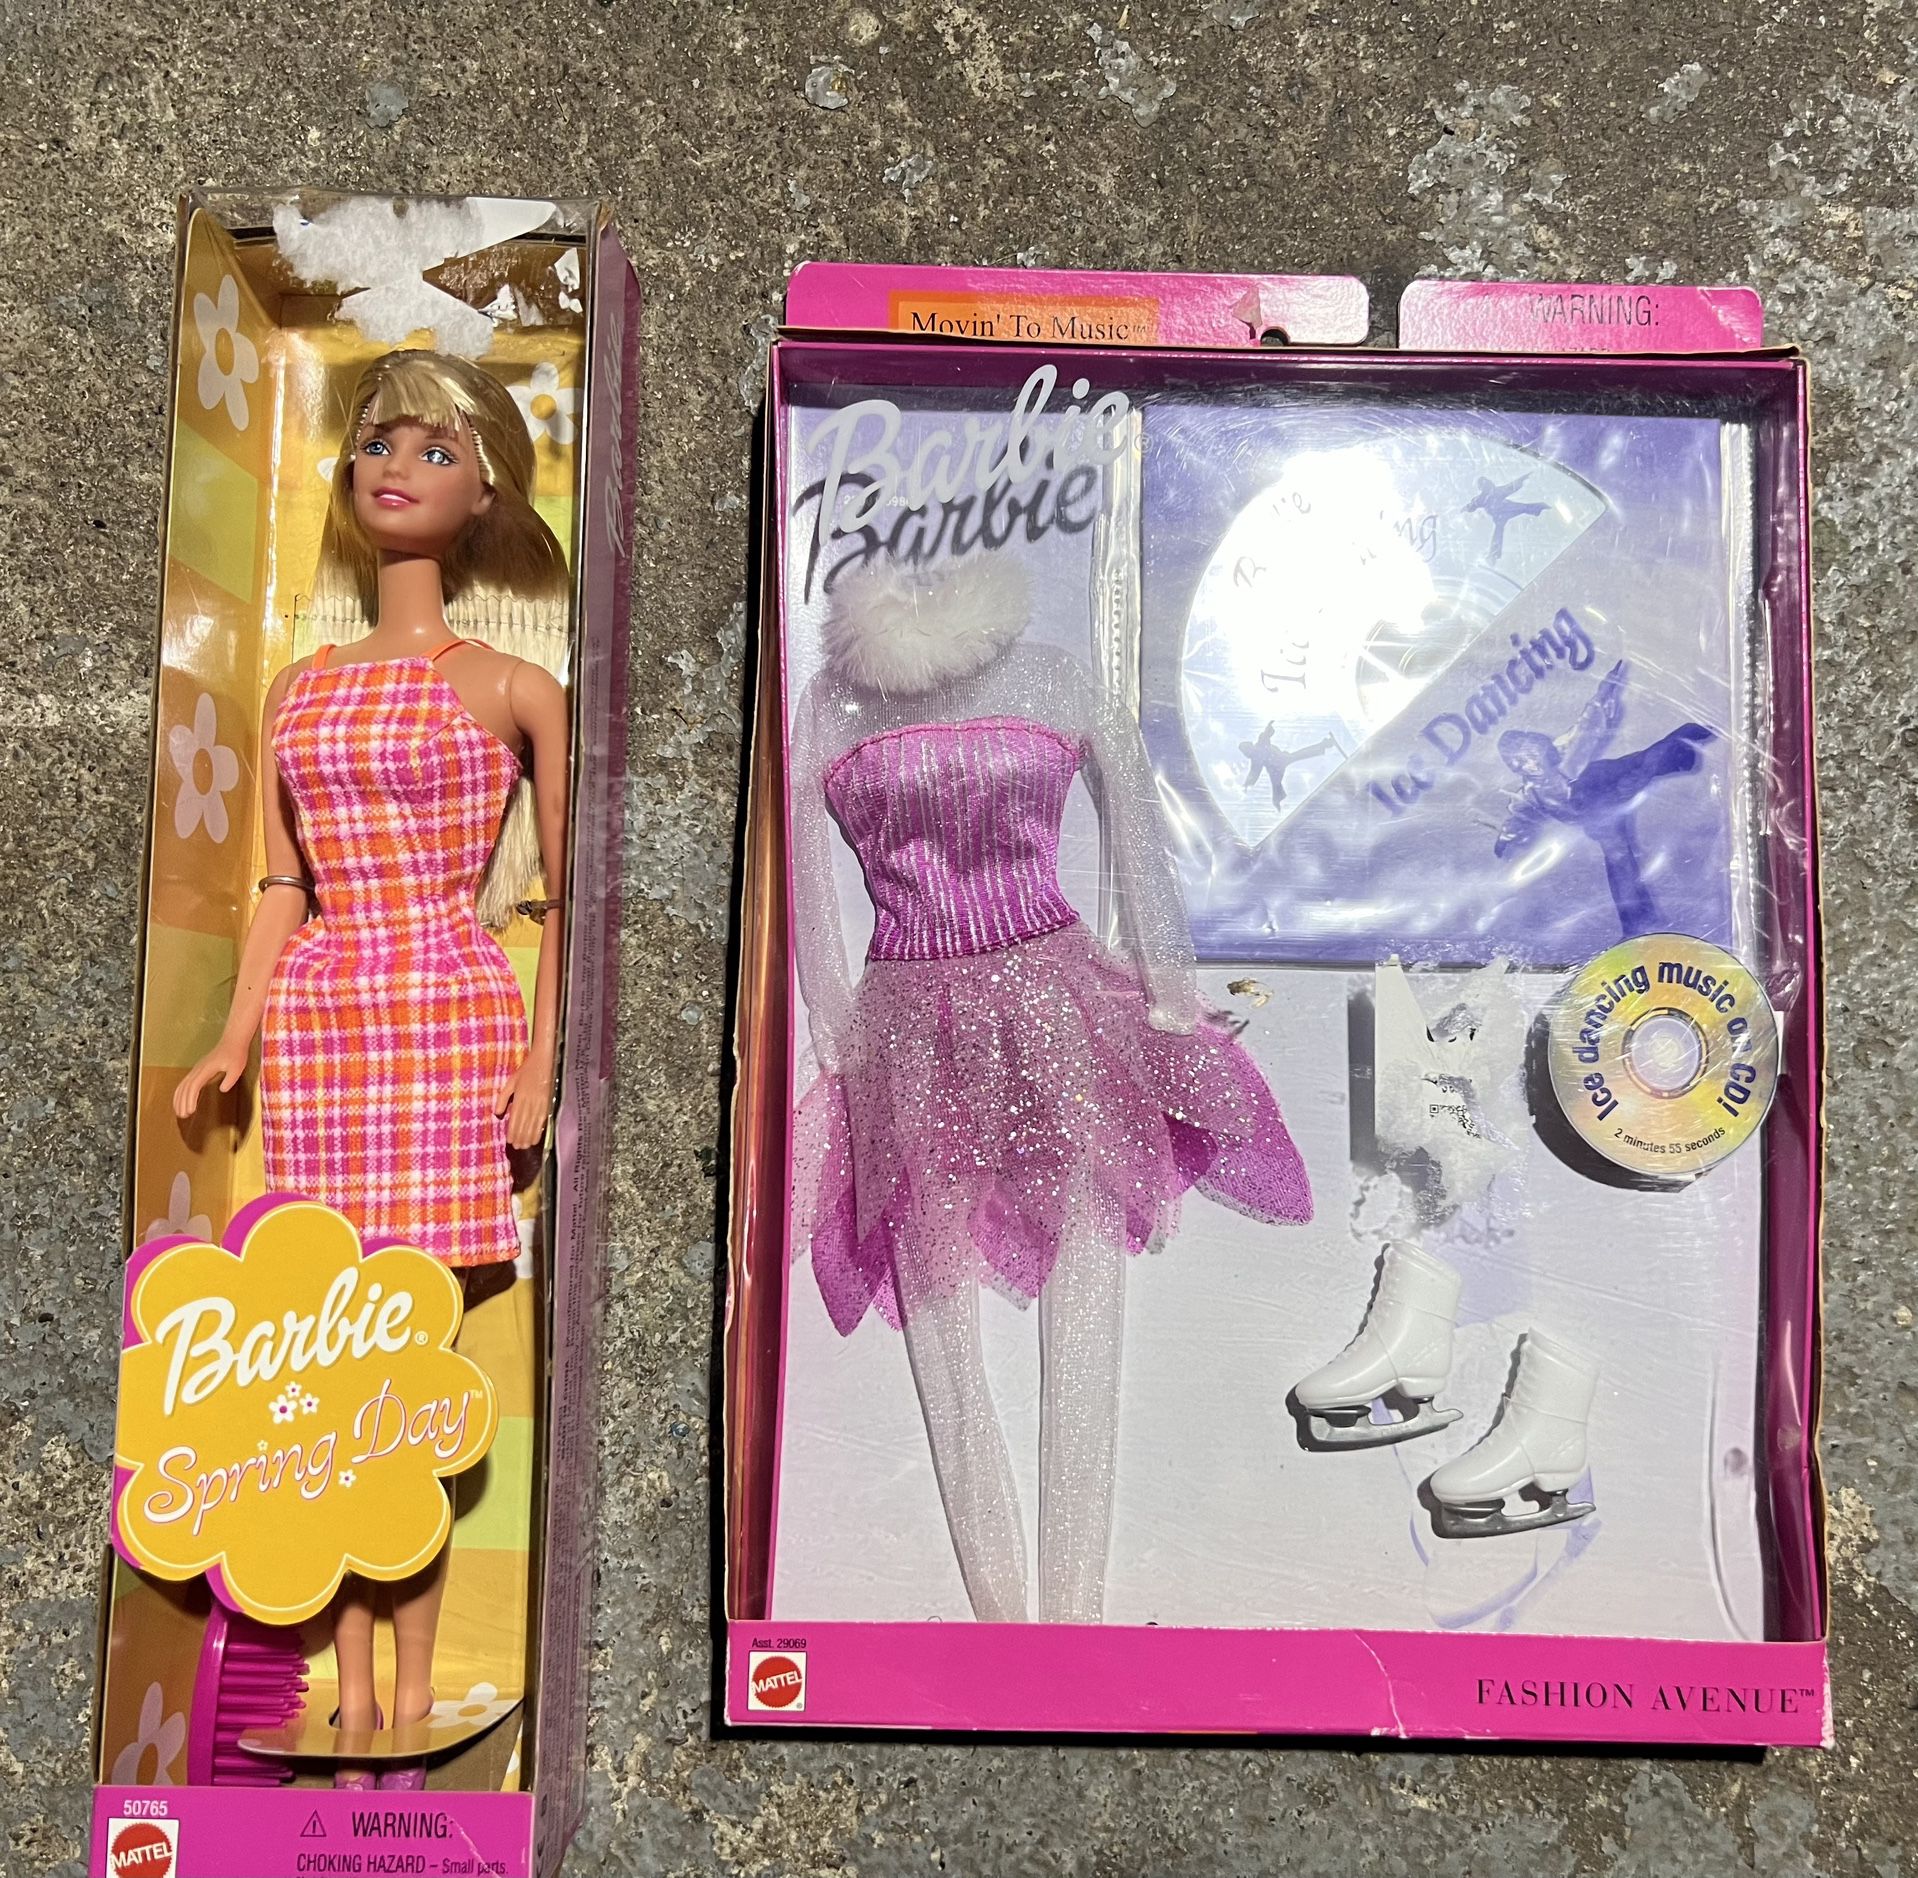 BEST OFFER Unopened Barbie Doll with Unopened Ice dancing Accessories 